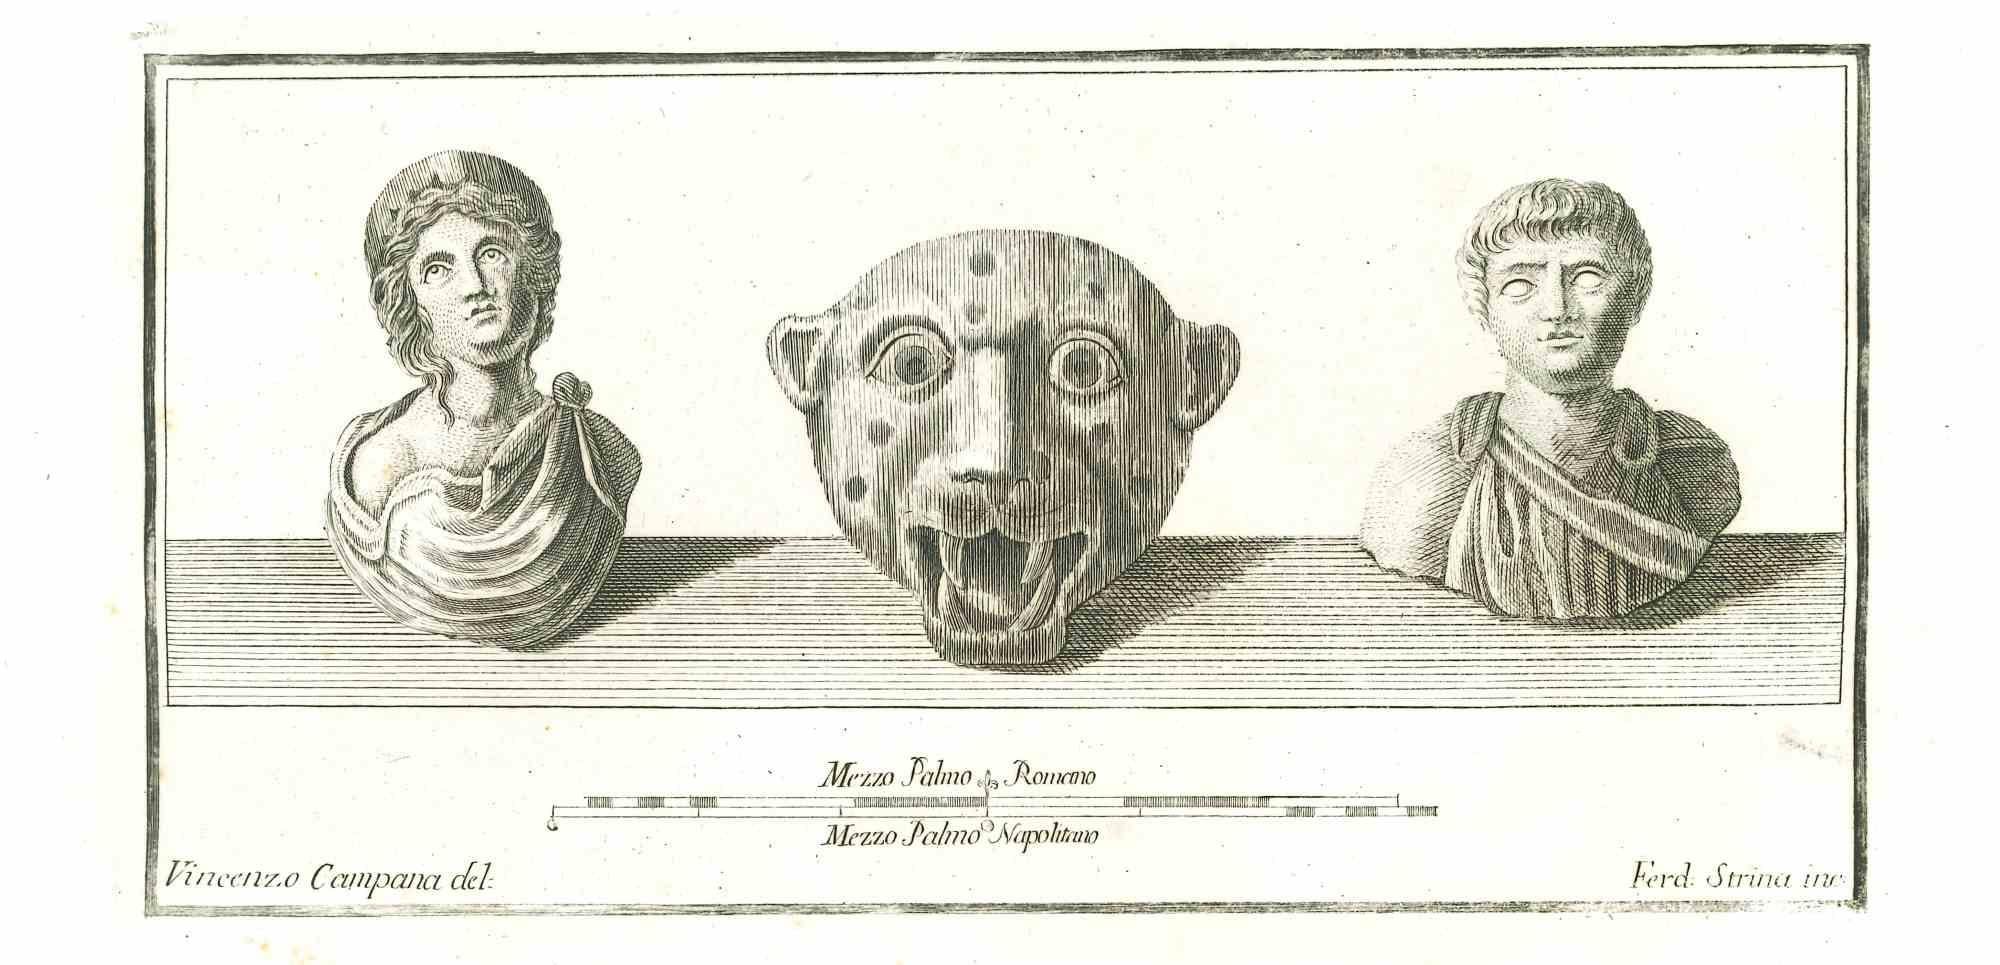 Ancient Roman Statues - Original Etching by Carlo Nolli - 18th century